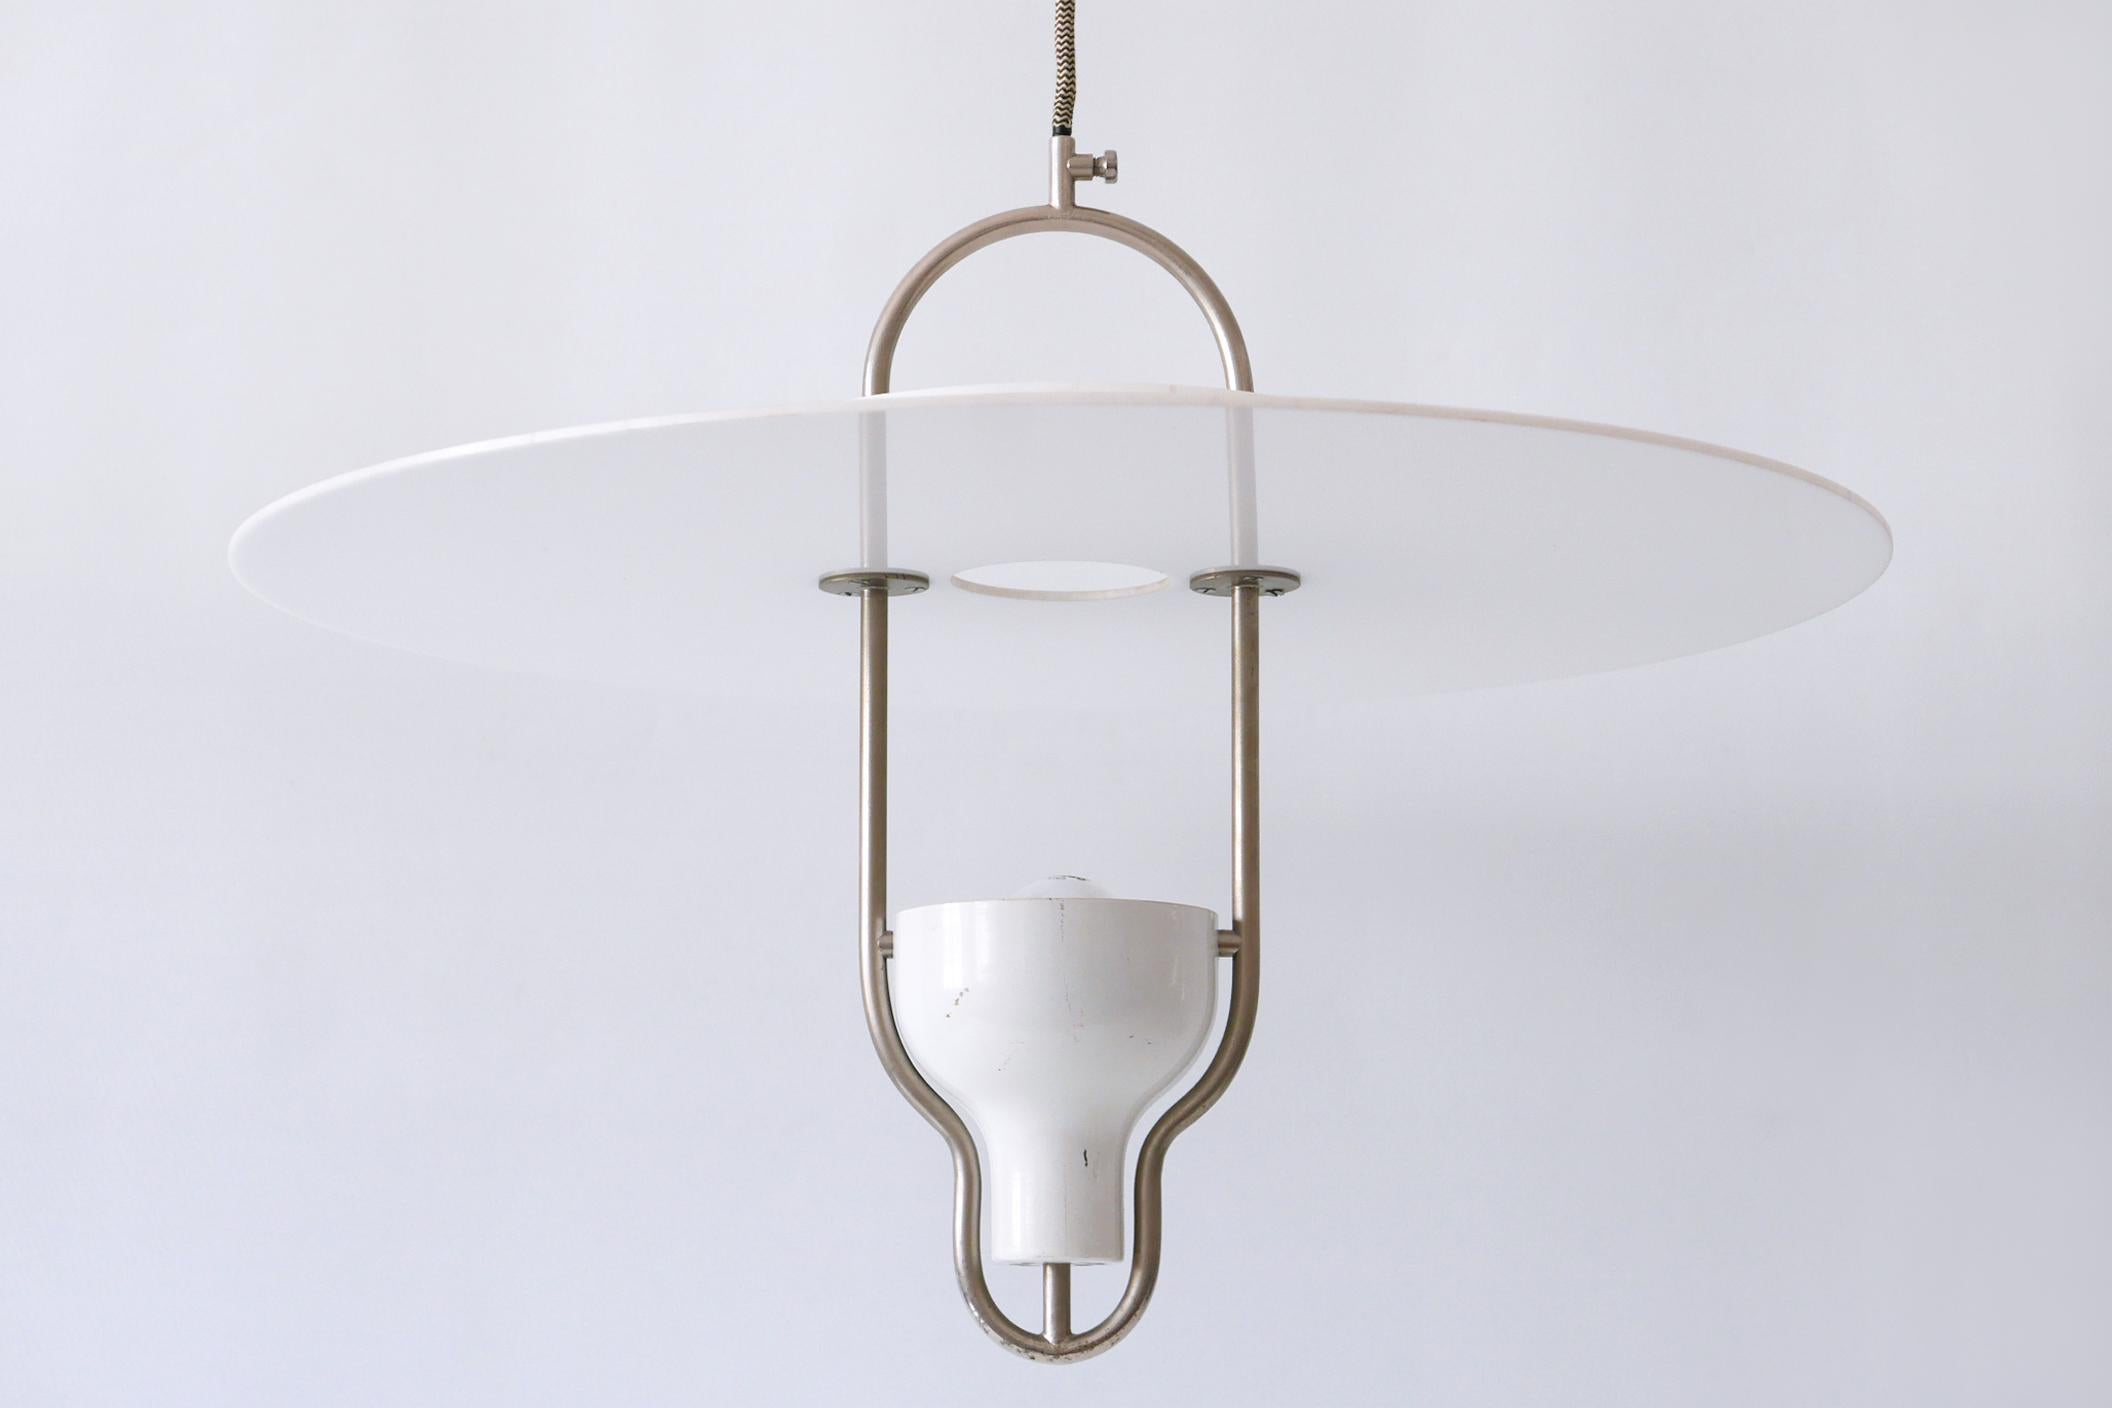 Exceptional Mid-Century Modern Ufo Pendant Lamp, Italy, 1960s For Sale 4